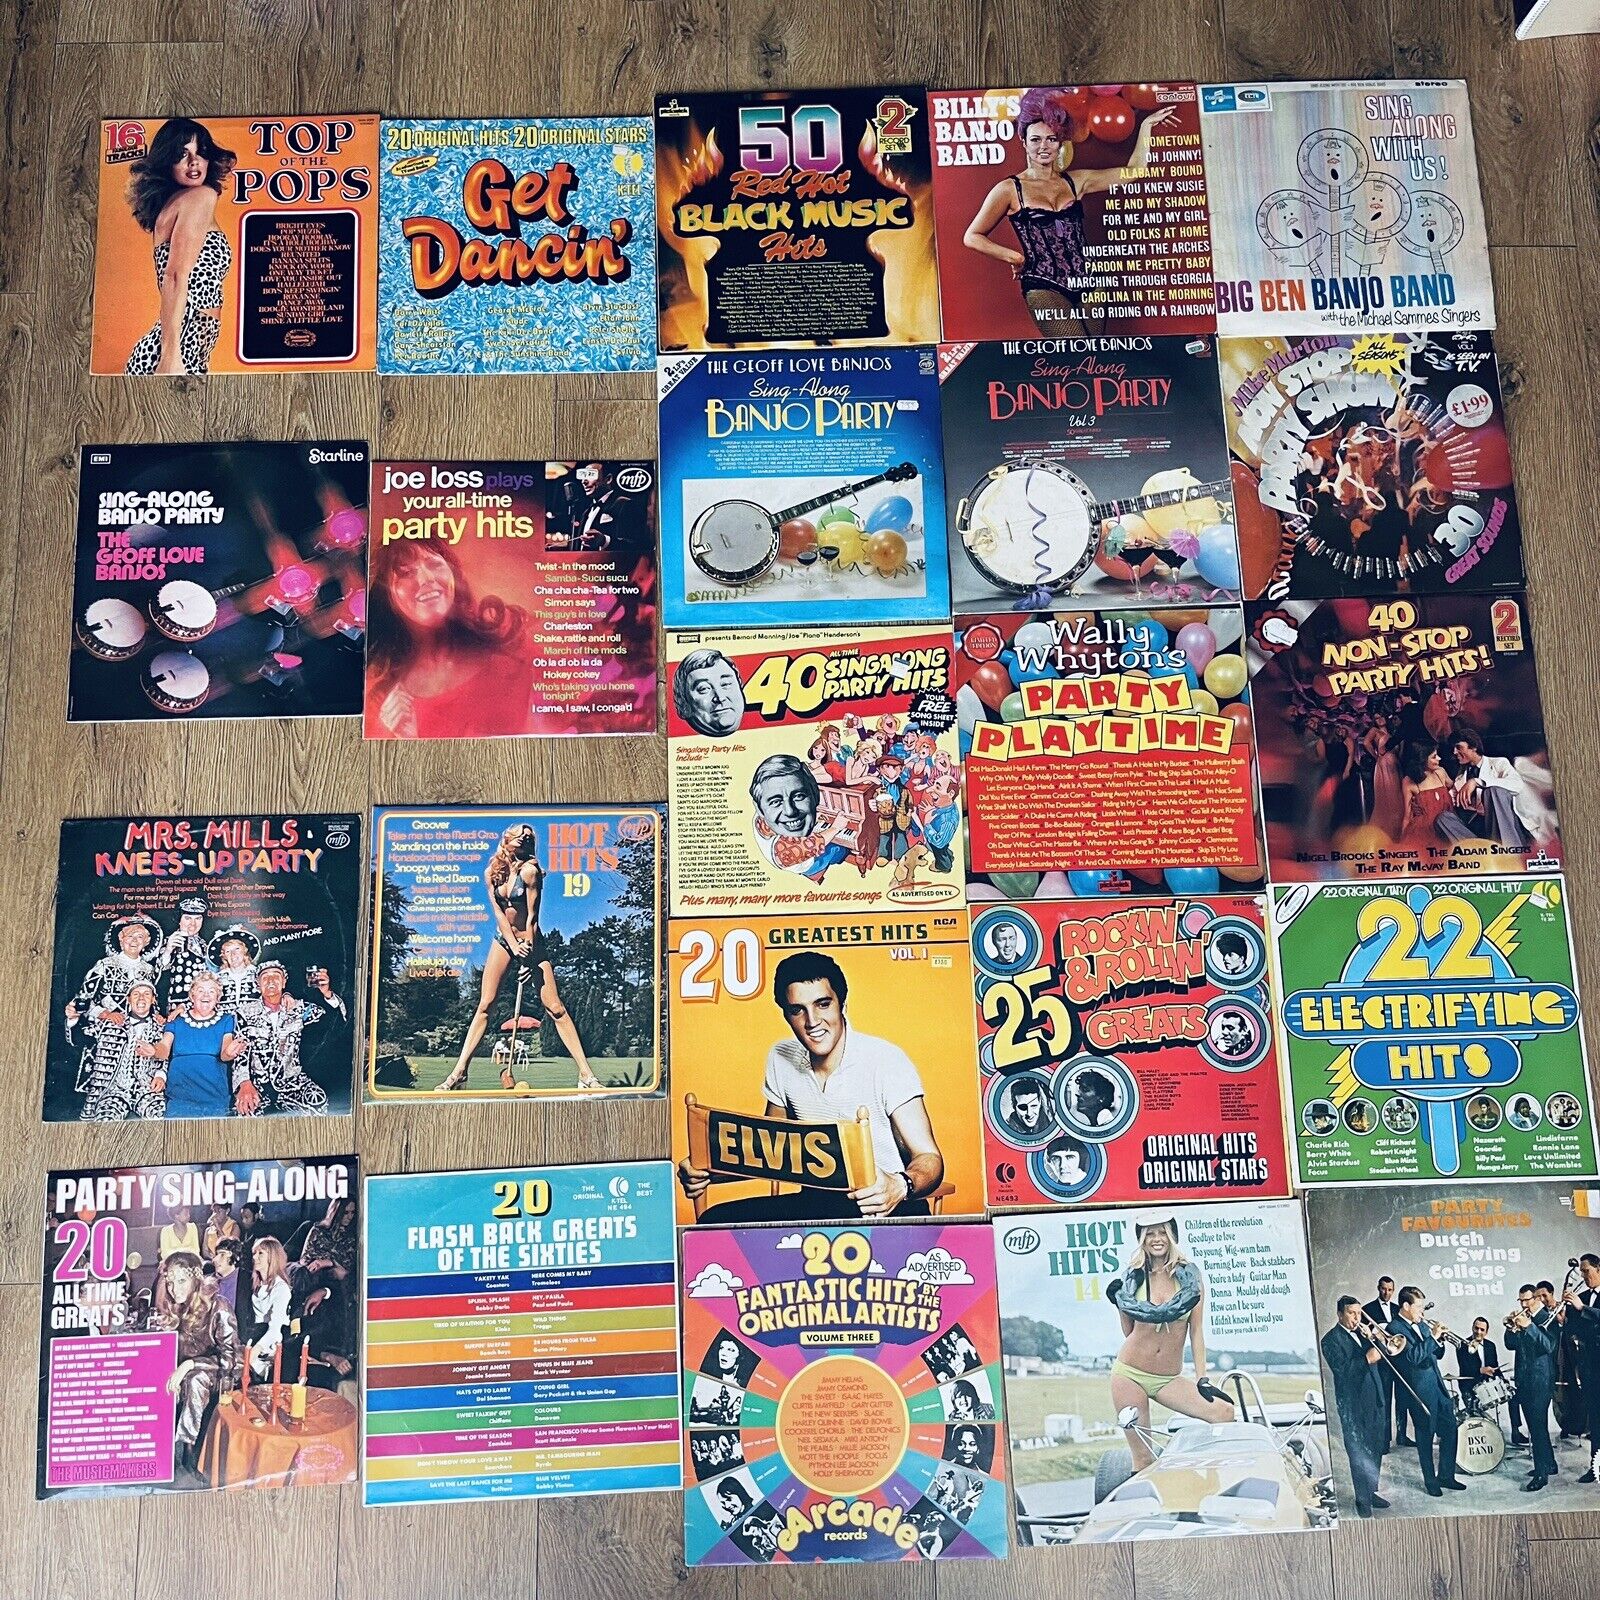 23 Retro LP Records POP Best of Party Banjo Sing Along Greatest Hits Vintage X23